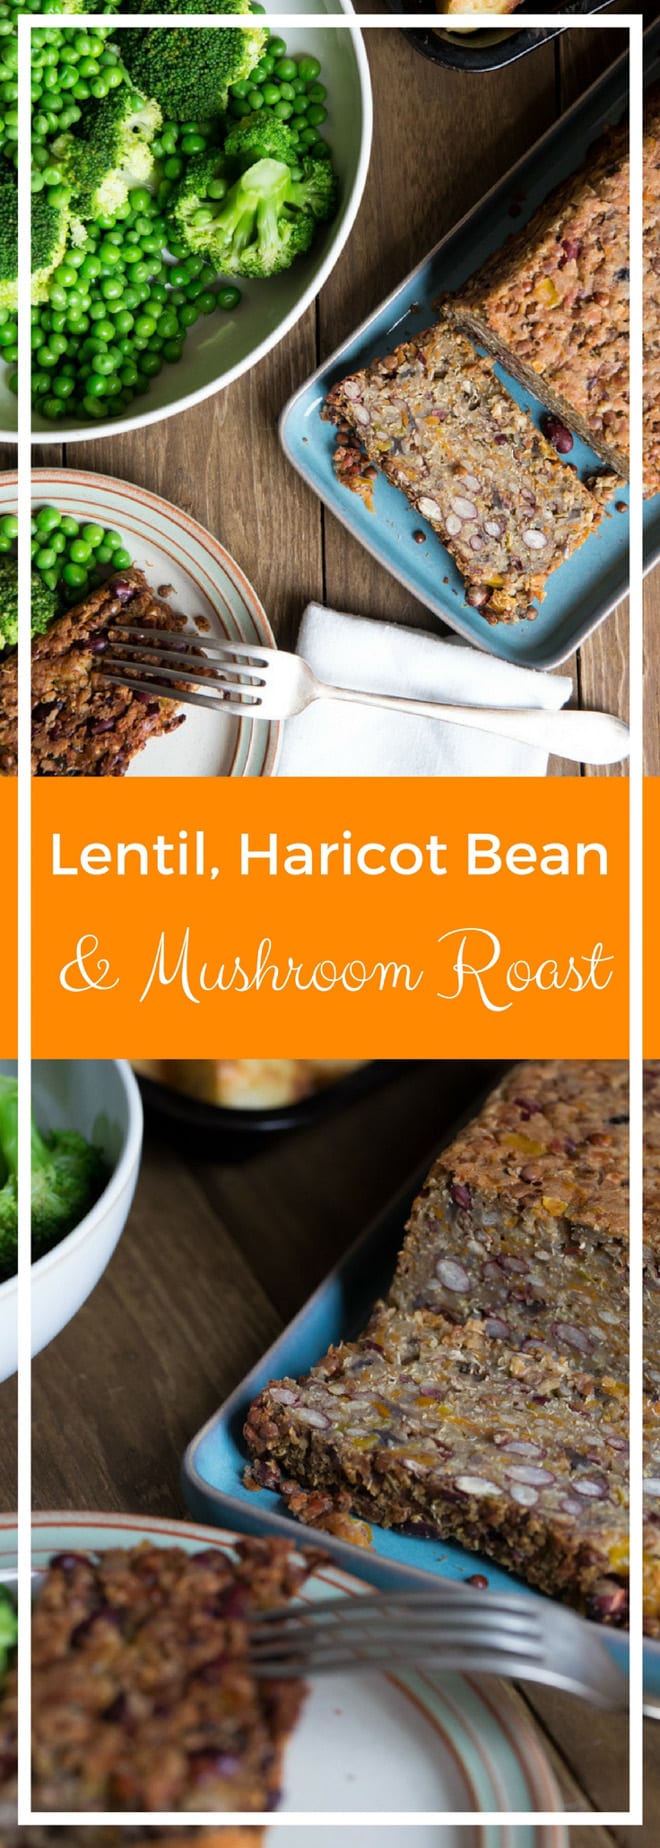 Lentil, Haricot Bean and Mushroom Roast - Deliciously vegan Christmas alternative that's simple to make ahead and reheat on the 'Big Day' | thecookandhim.com